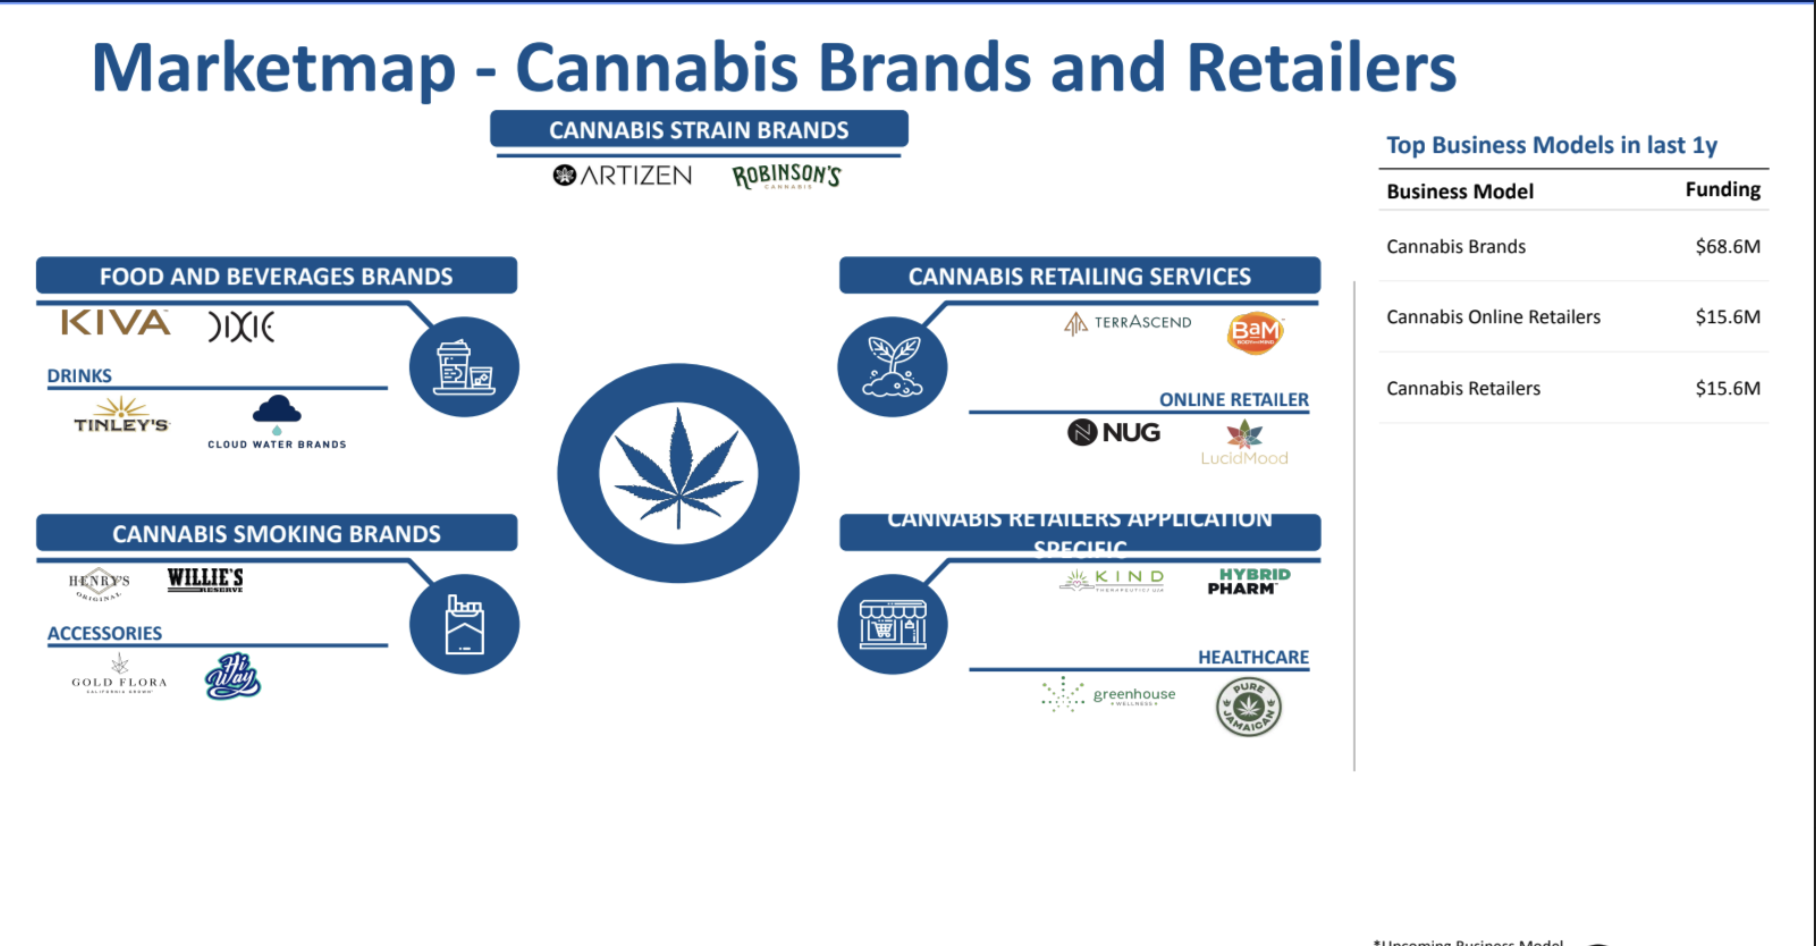 marketmap of cannabis brands and retailer- Cannabis Industry Funding Landscape 